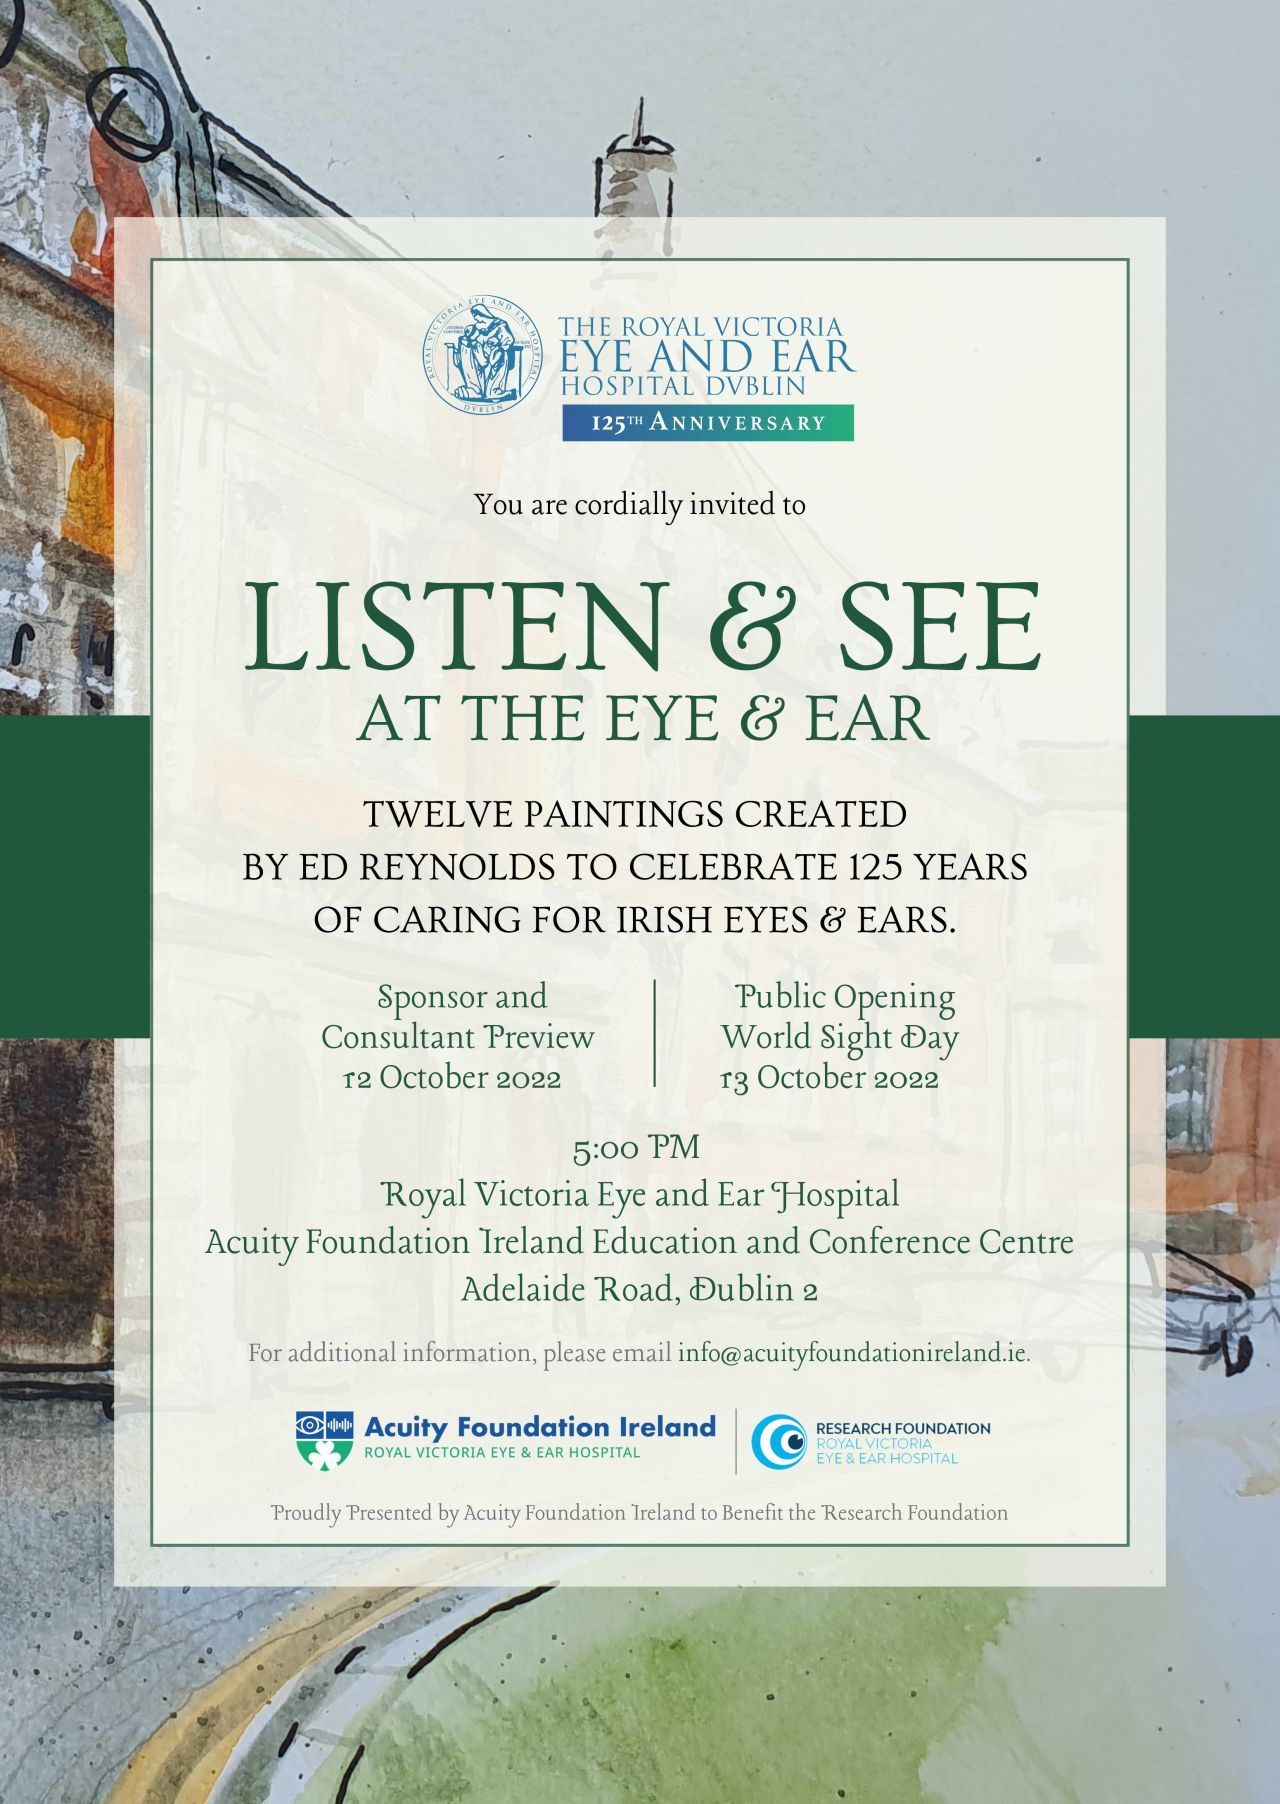 Invitation for the Listen & See at the Eye & Ear